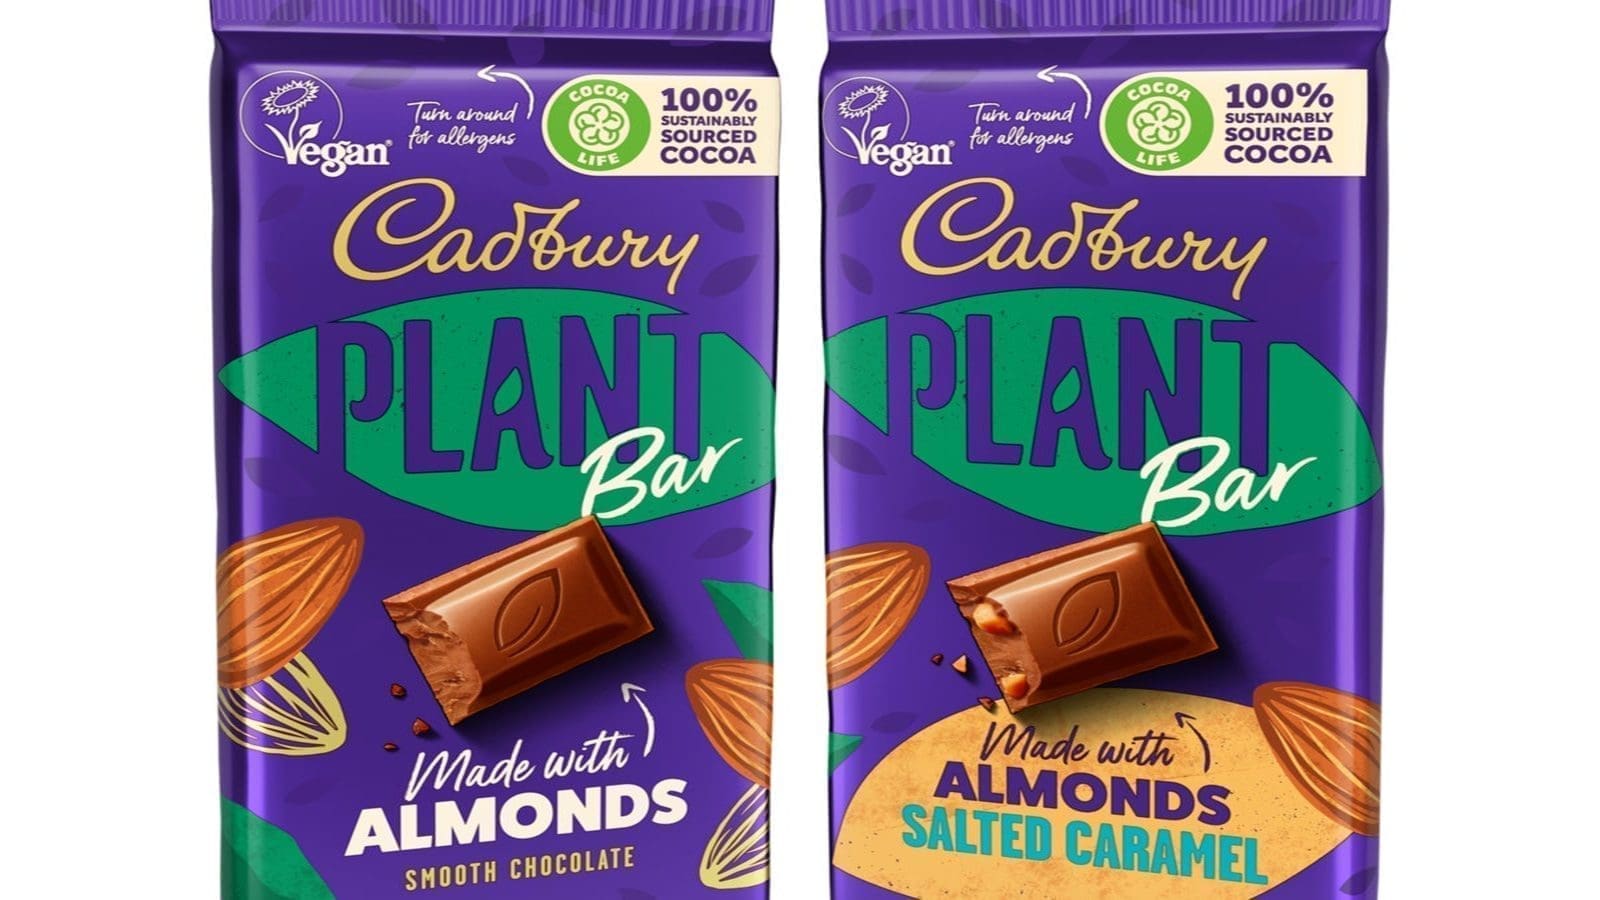 Mondelēz owned dairy brand Cadbury enters plant-based scene with launch of first vegan chocolate bar